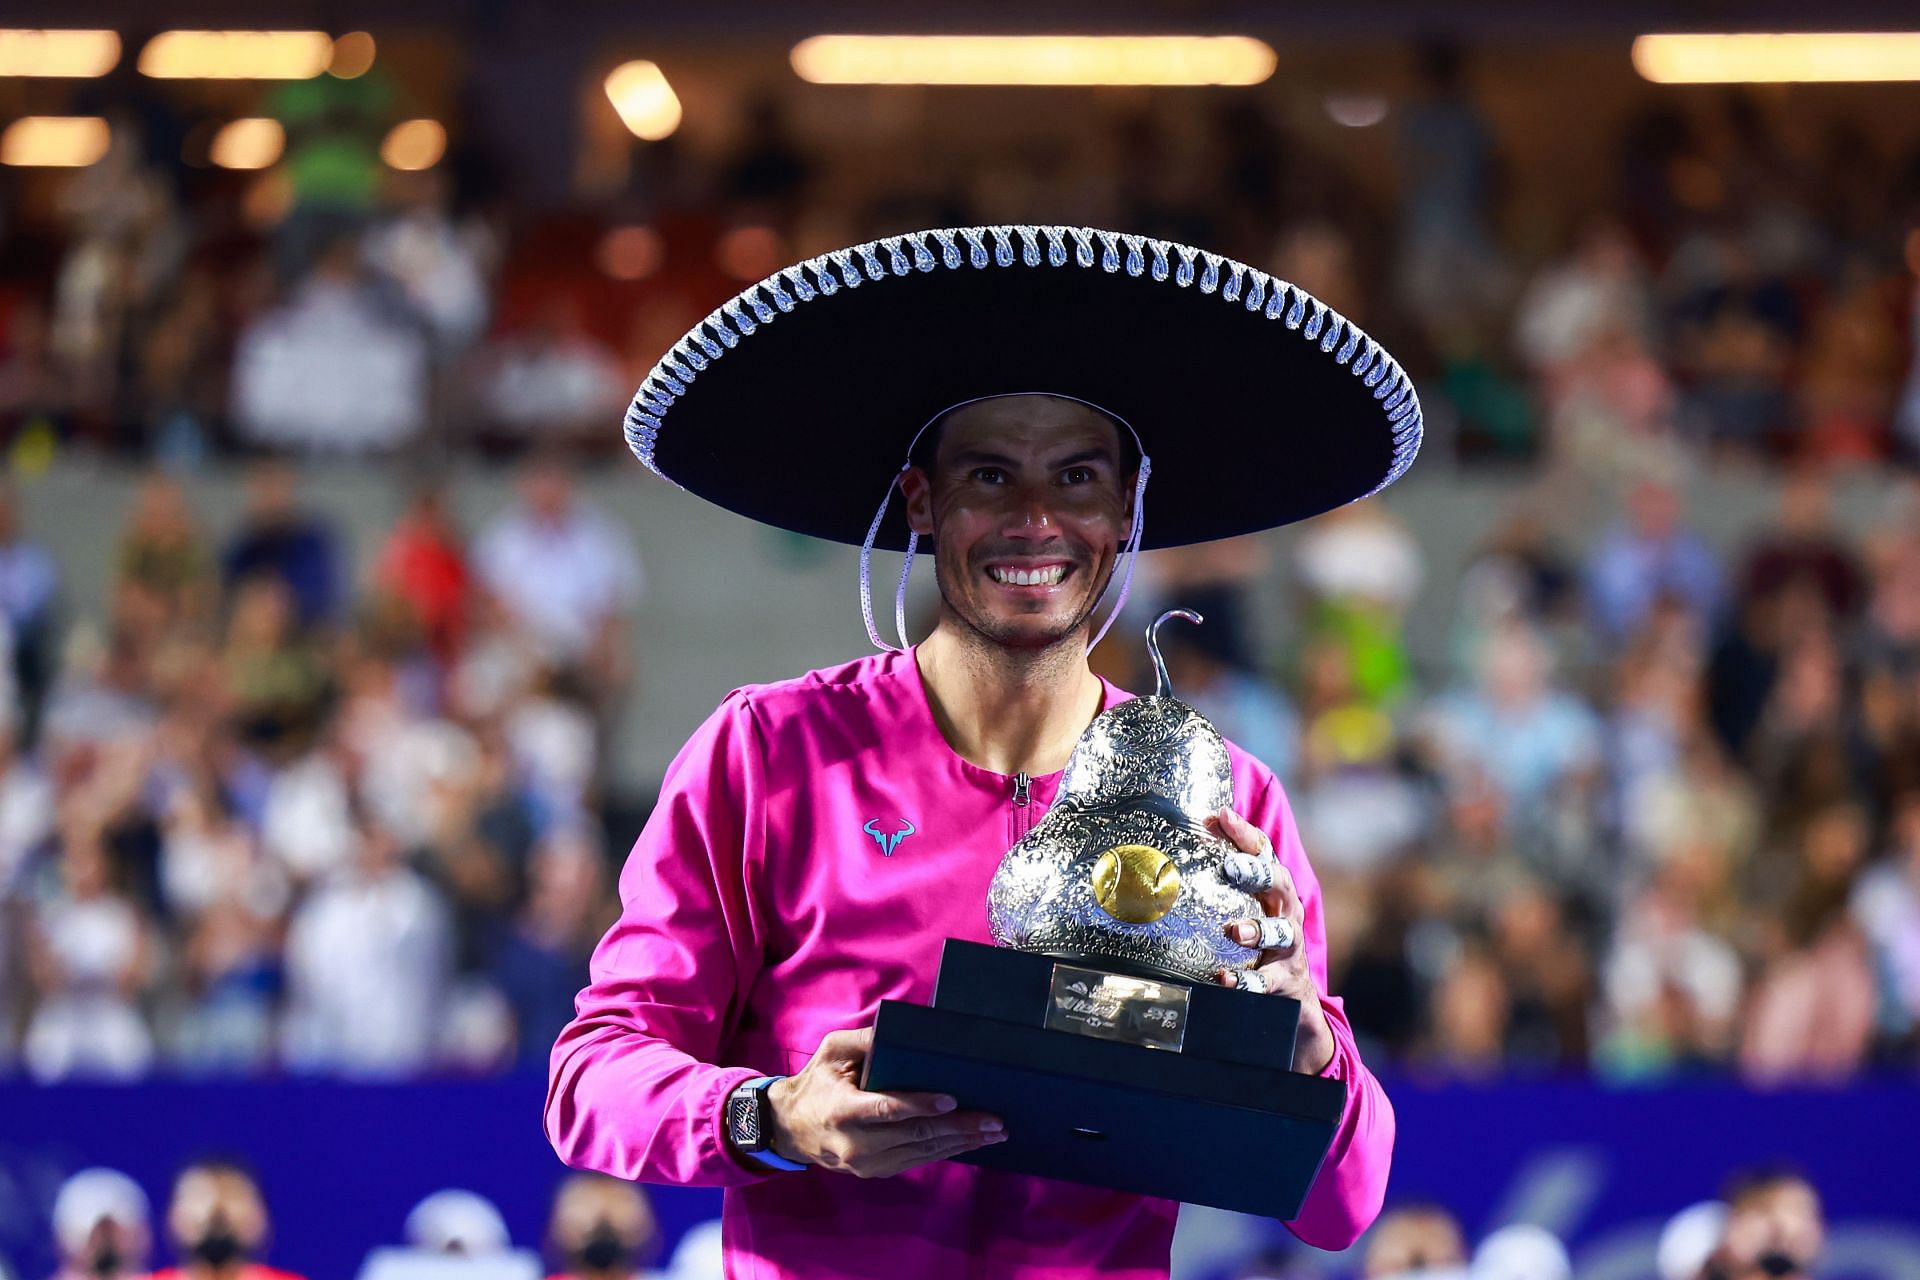 Rafael Nadal with the Acapulco Open title